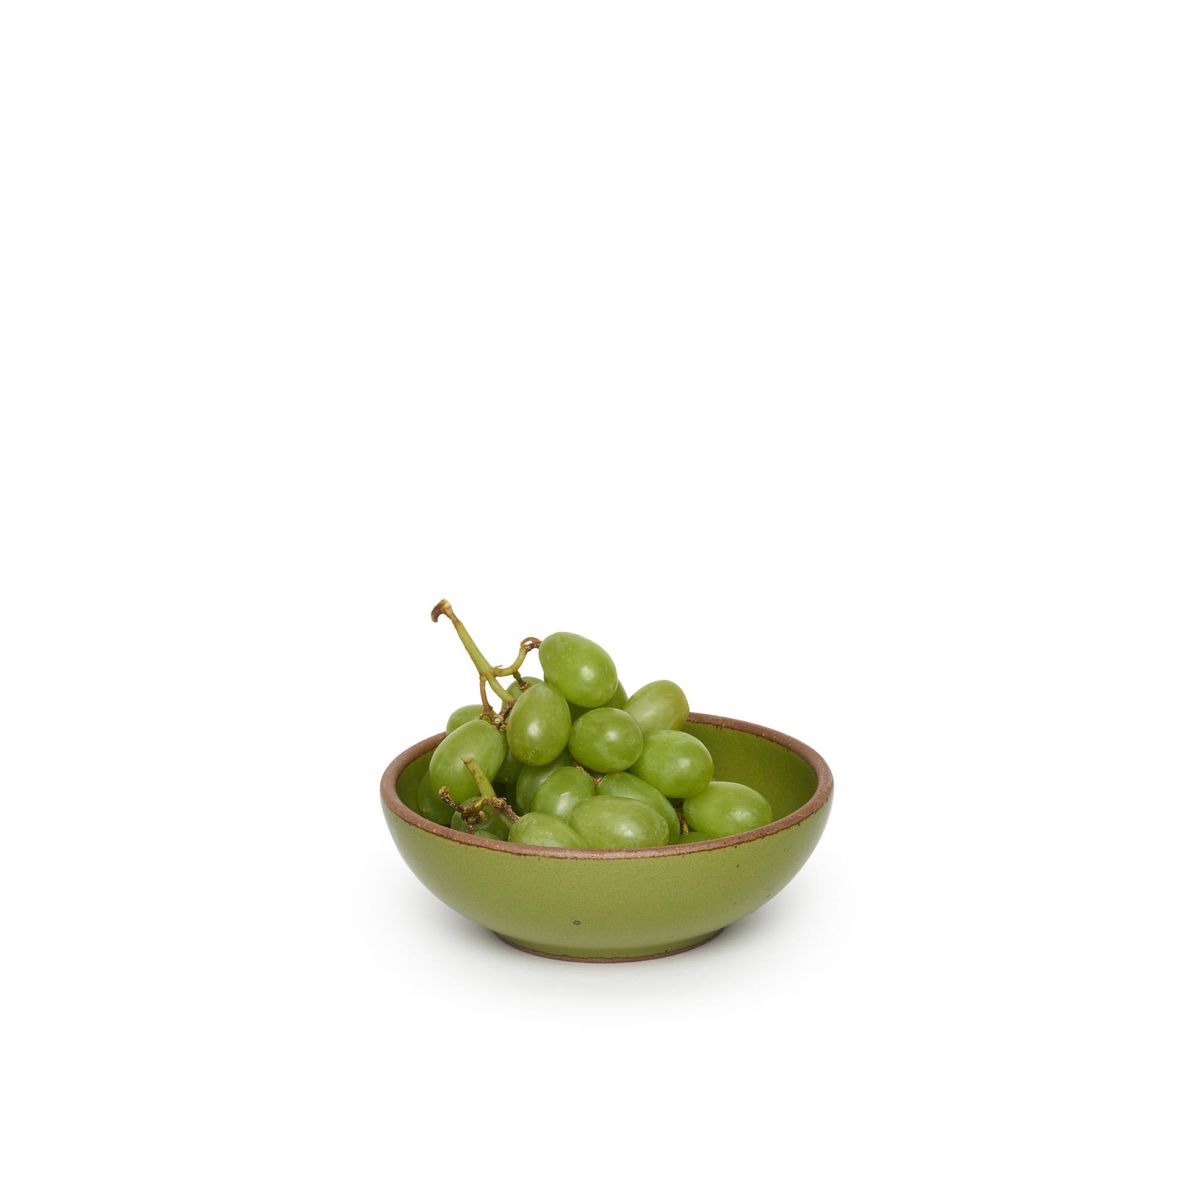 Breakfast Bowl in Fiddlehead, a mossy, olive green. Pictured with green grapes.